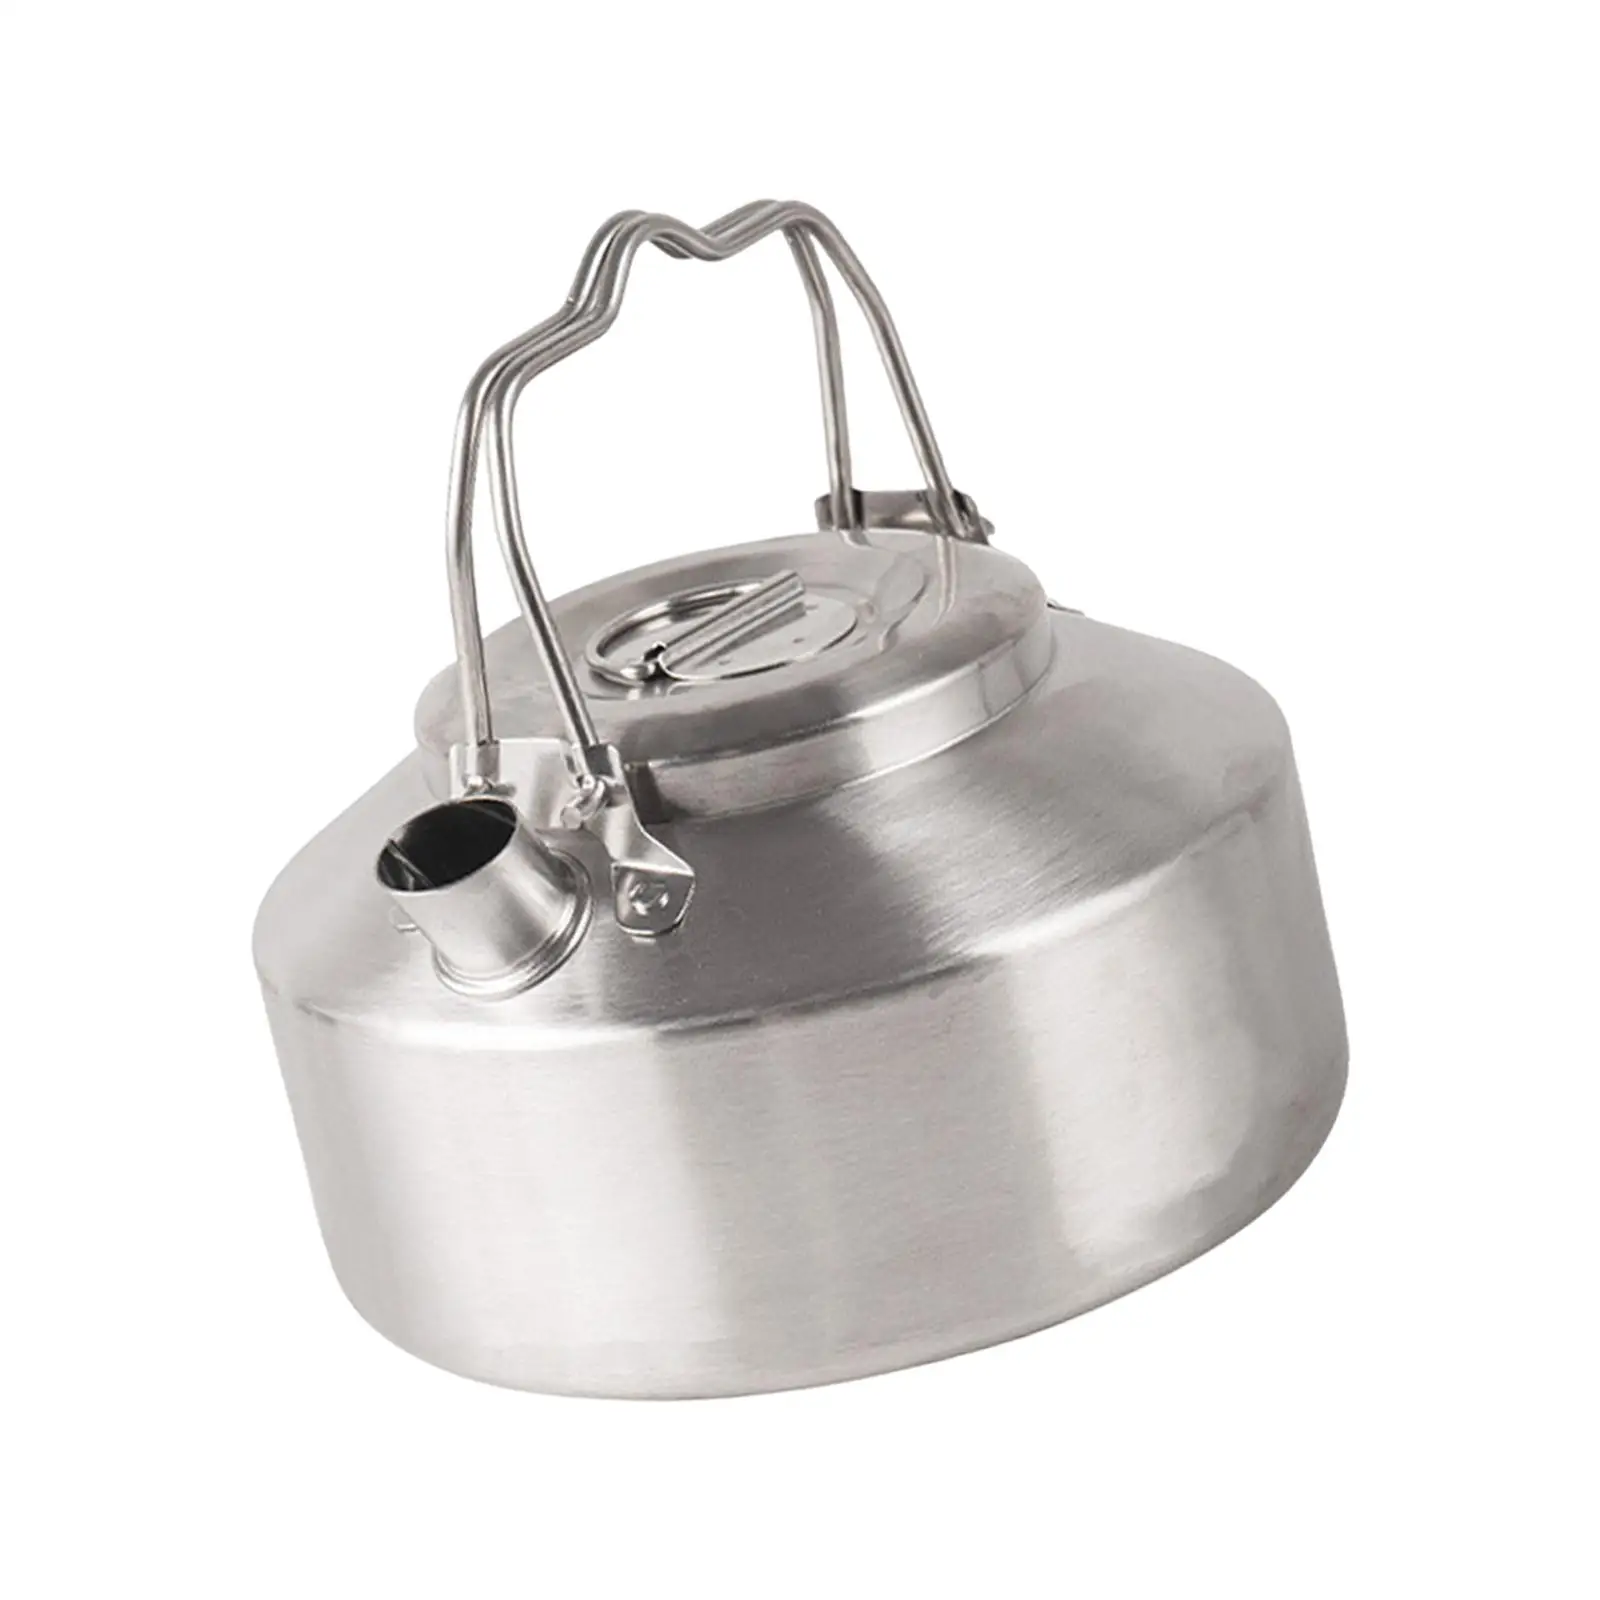 Camping Kettle for Open Fire for Boiling Water On Fire Tea Kettle Small Kettle for Mountaineering Picnic Barbecue Kitchen